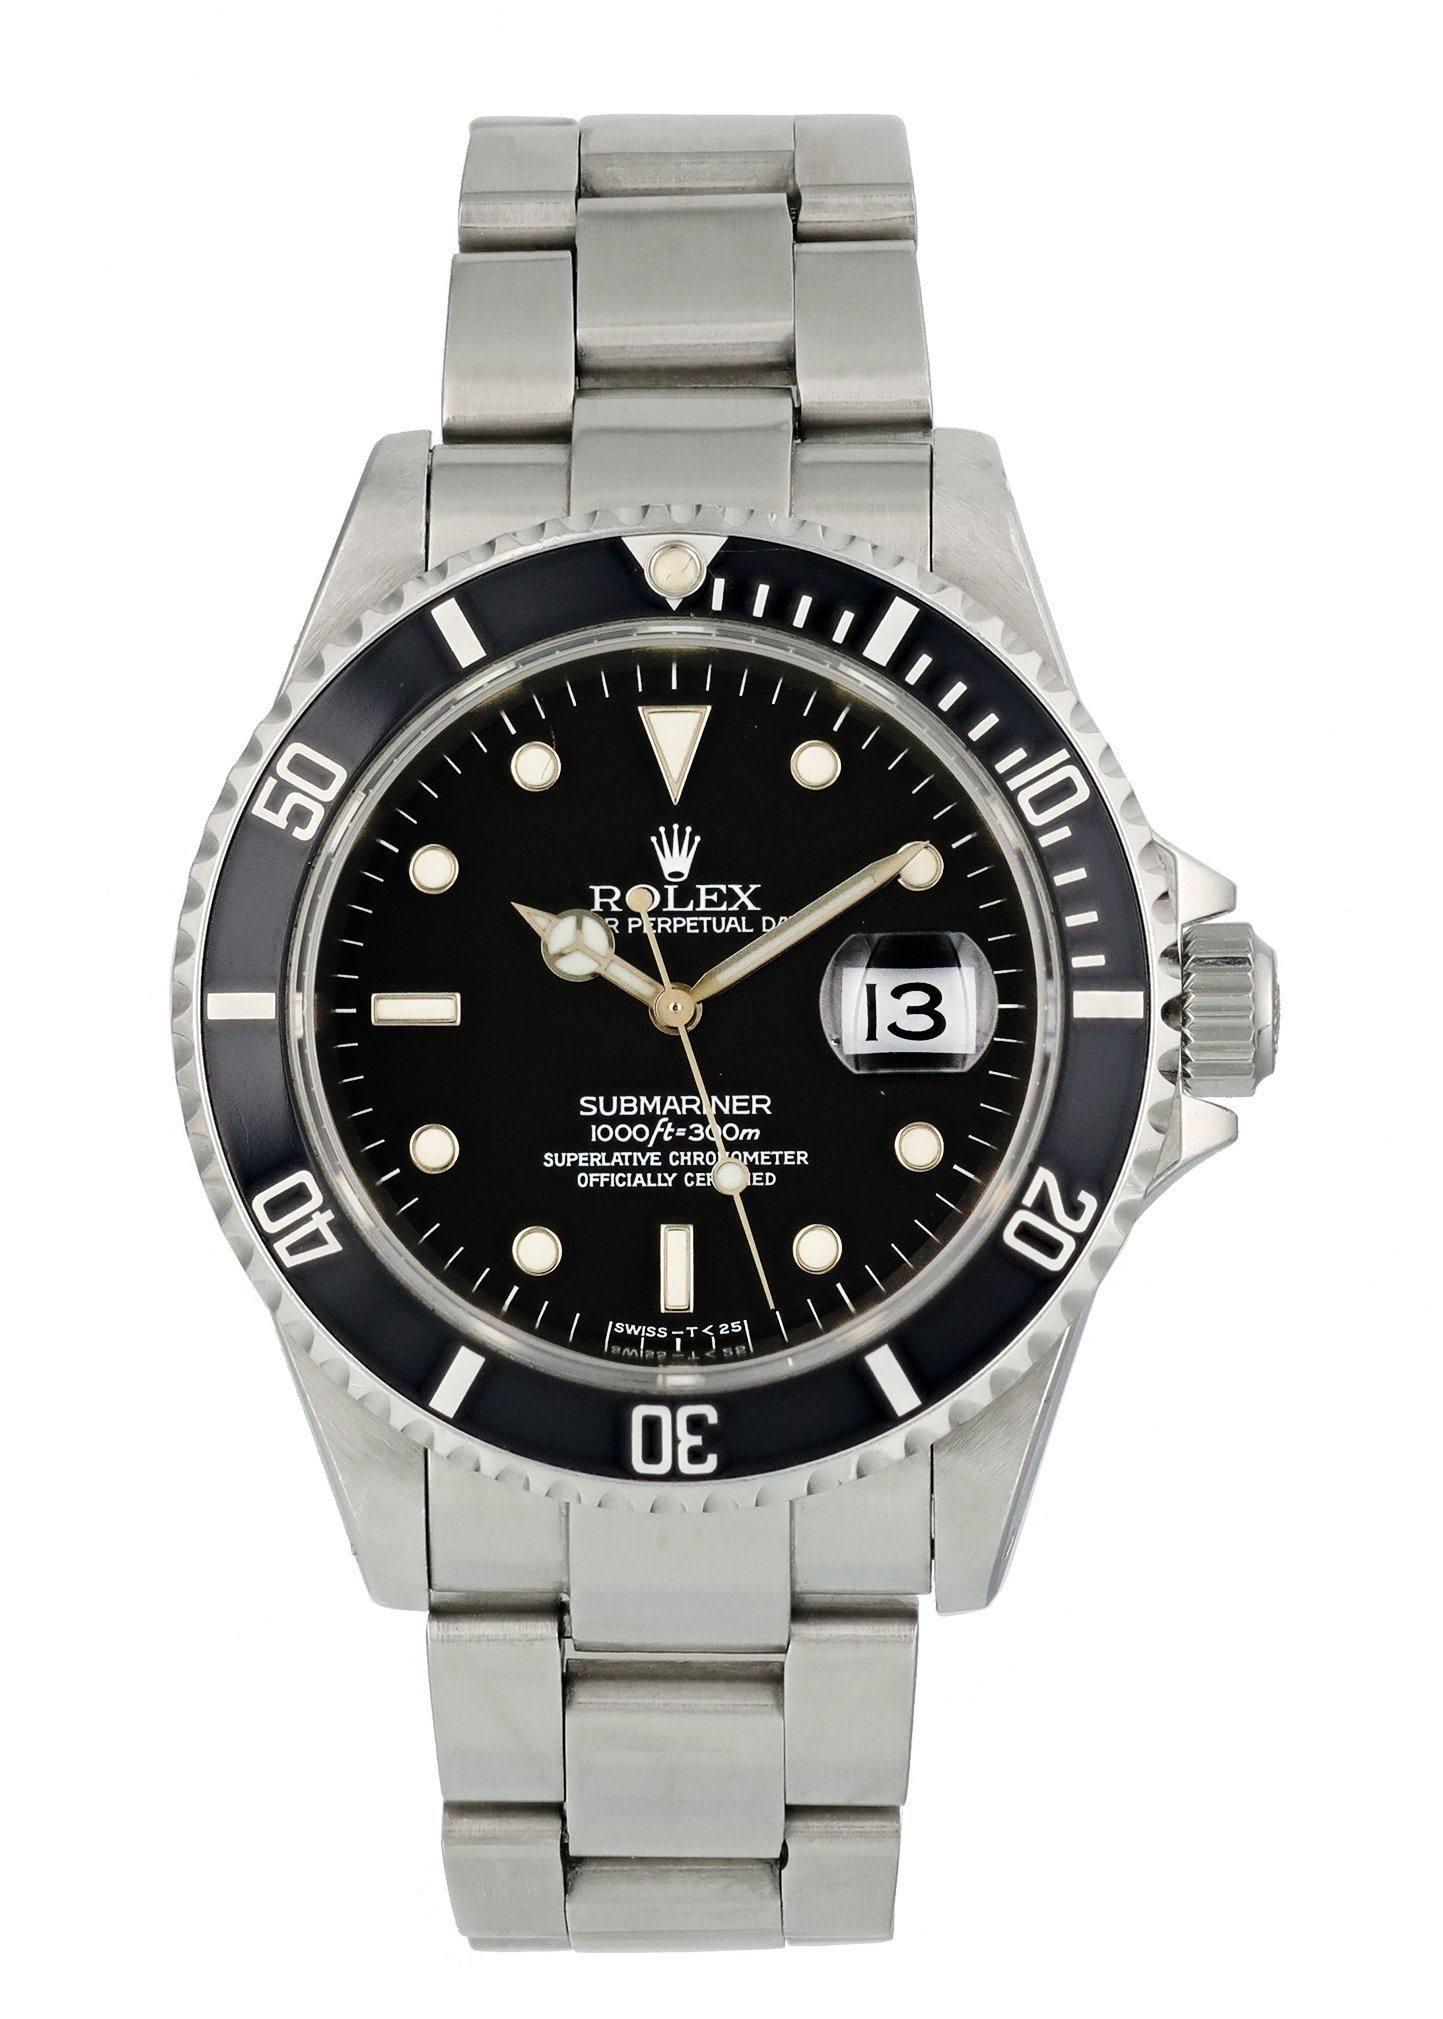 Rolex Submariner 16610 Men Watch. 
40mm Stainless Steel case. 
Stainless Steel Unidirectional bezel. 
Black dial with Luminous Steel hands and index, dot hour markers.
Minute markers on the outer dial. 
Date display at the 3 o'clock position.